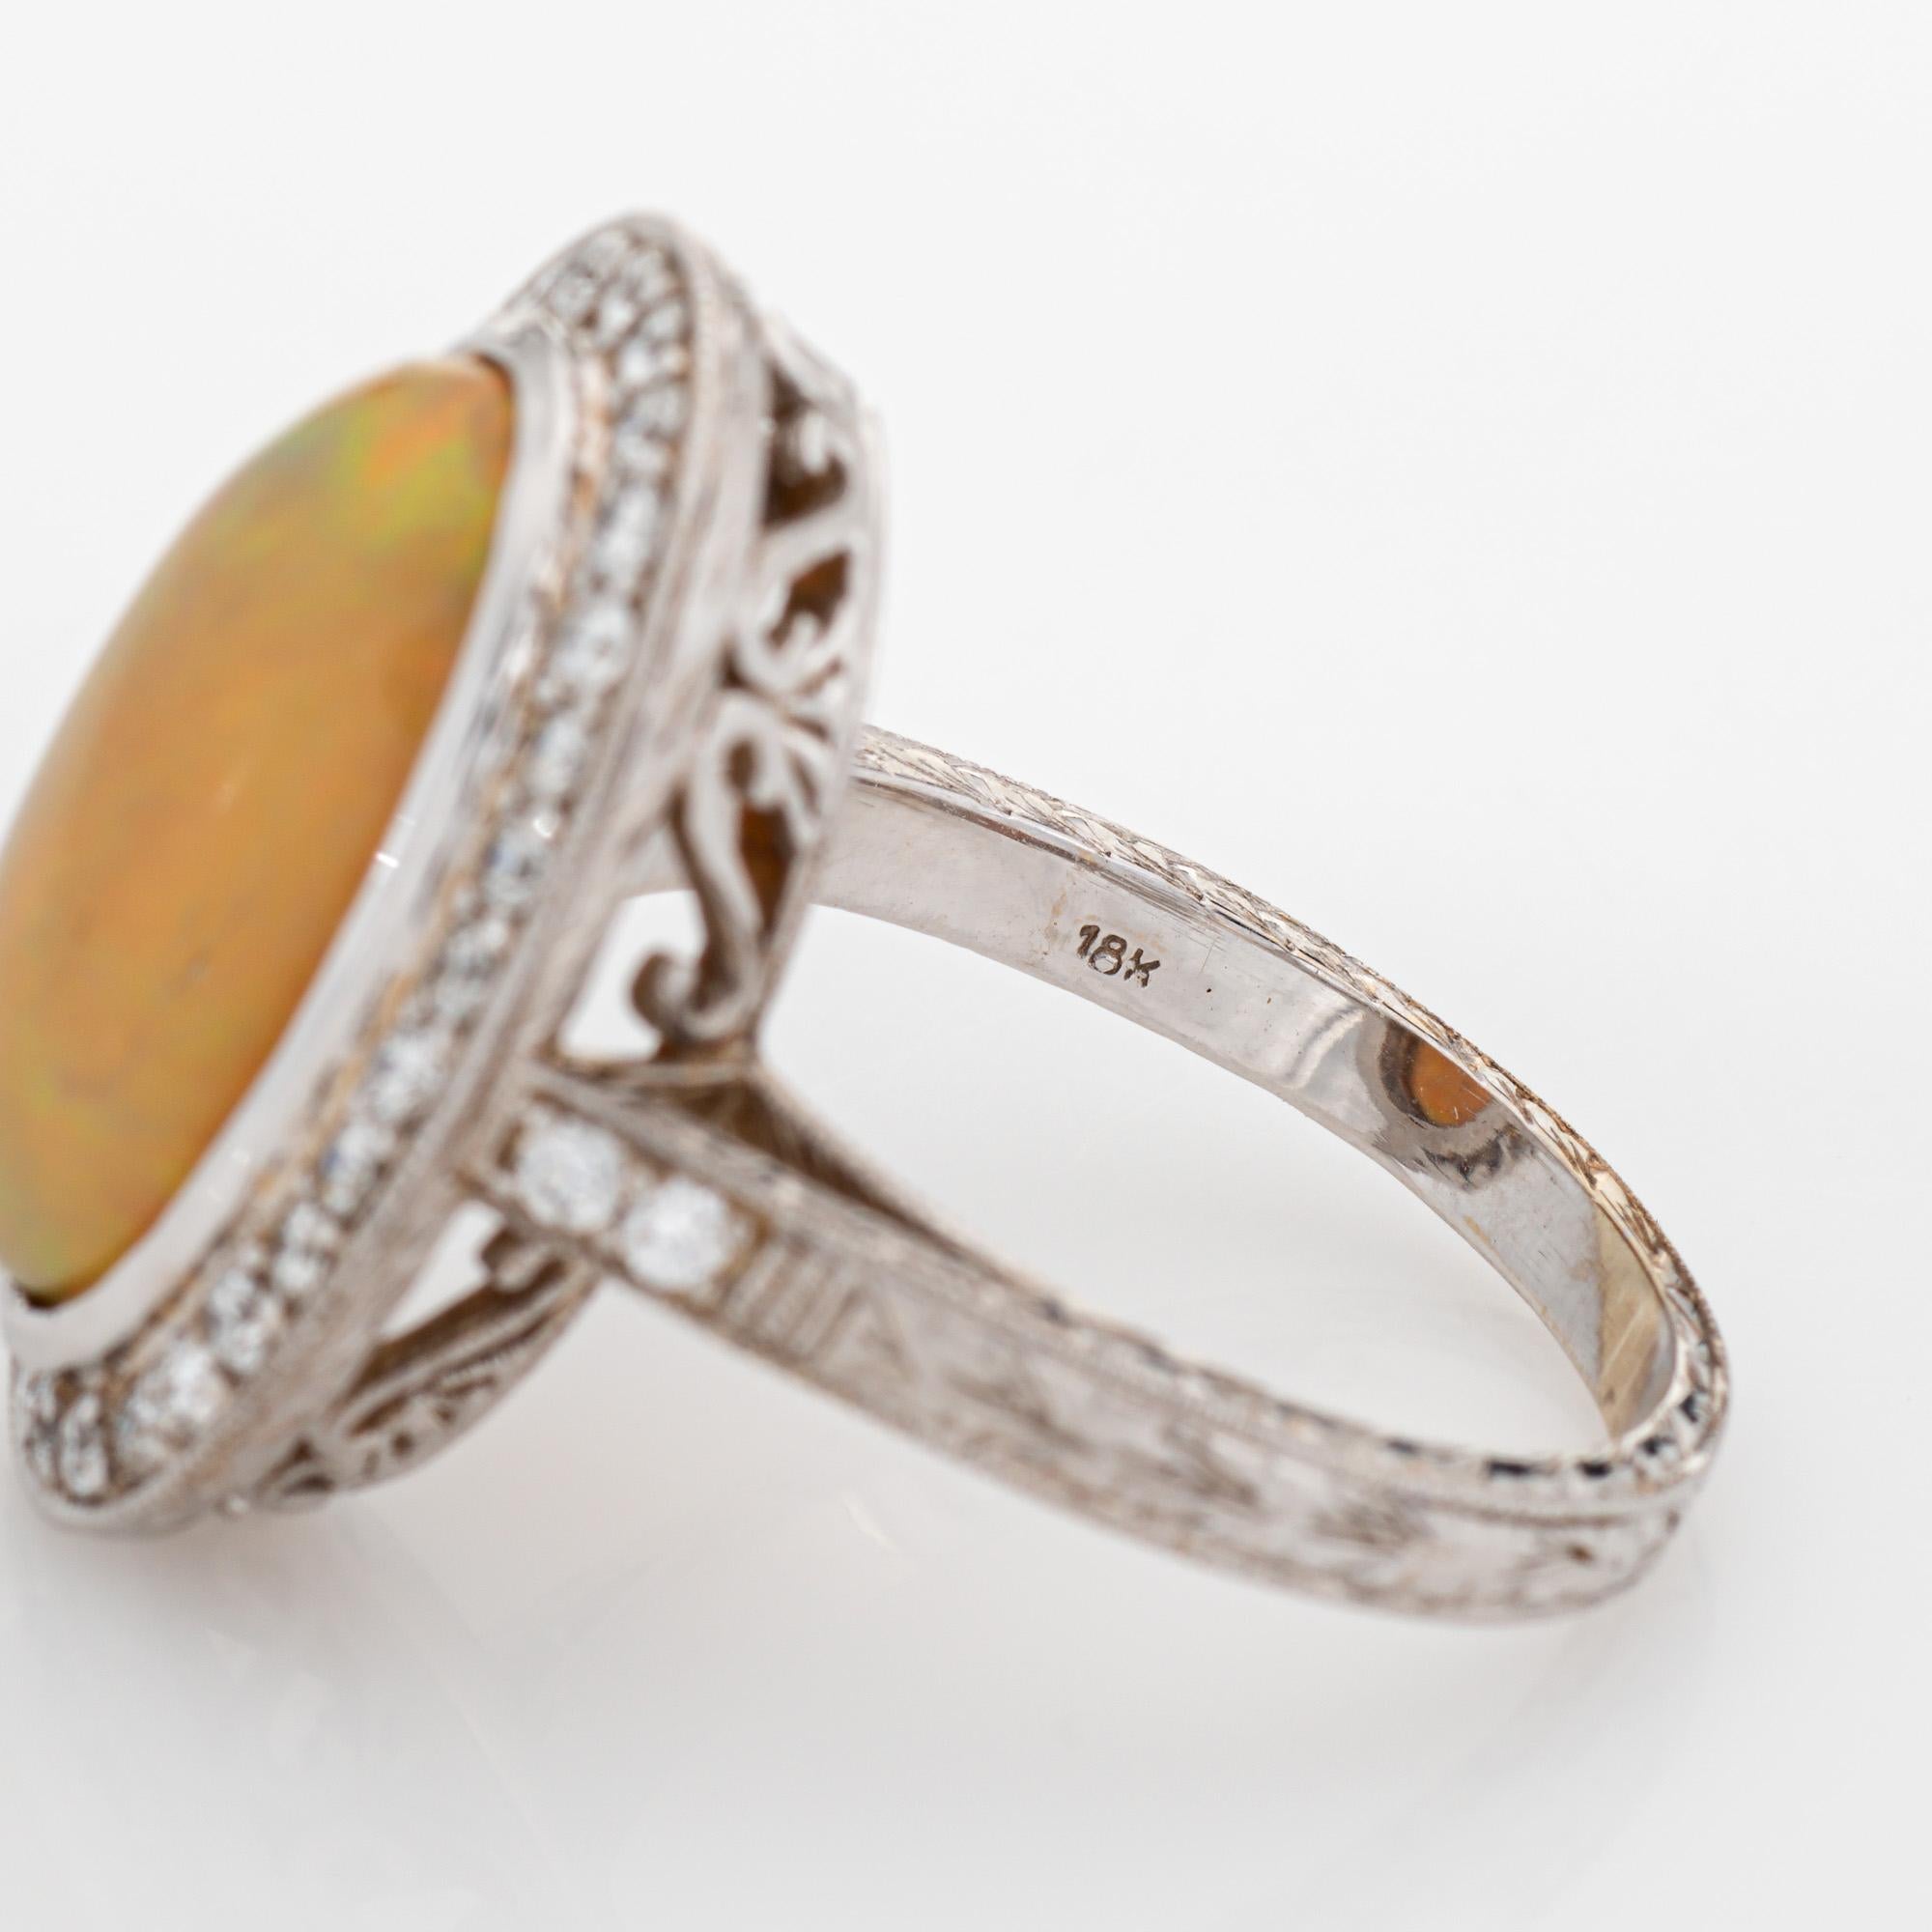 Fire Opal Diamond Ring Large Oval Estate 18k White Gold Sz 9 Cocktail Fine Jewel For Sale 1